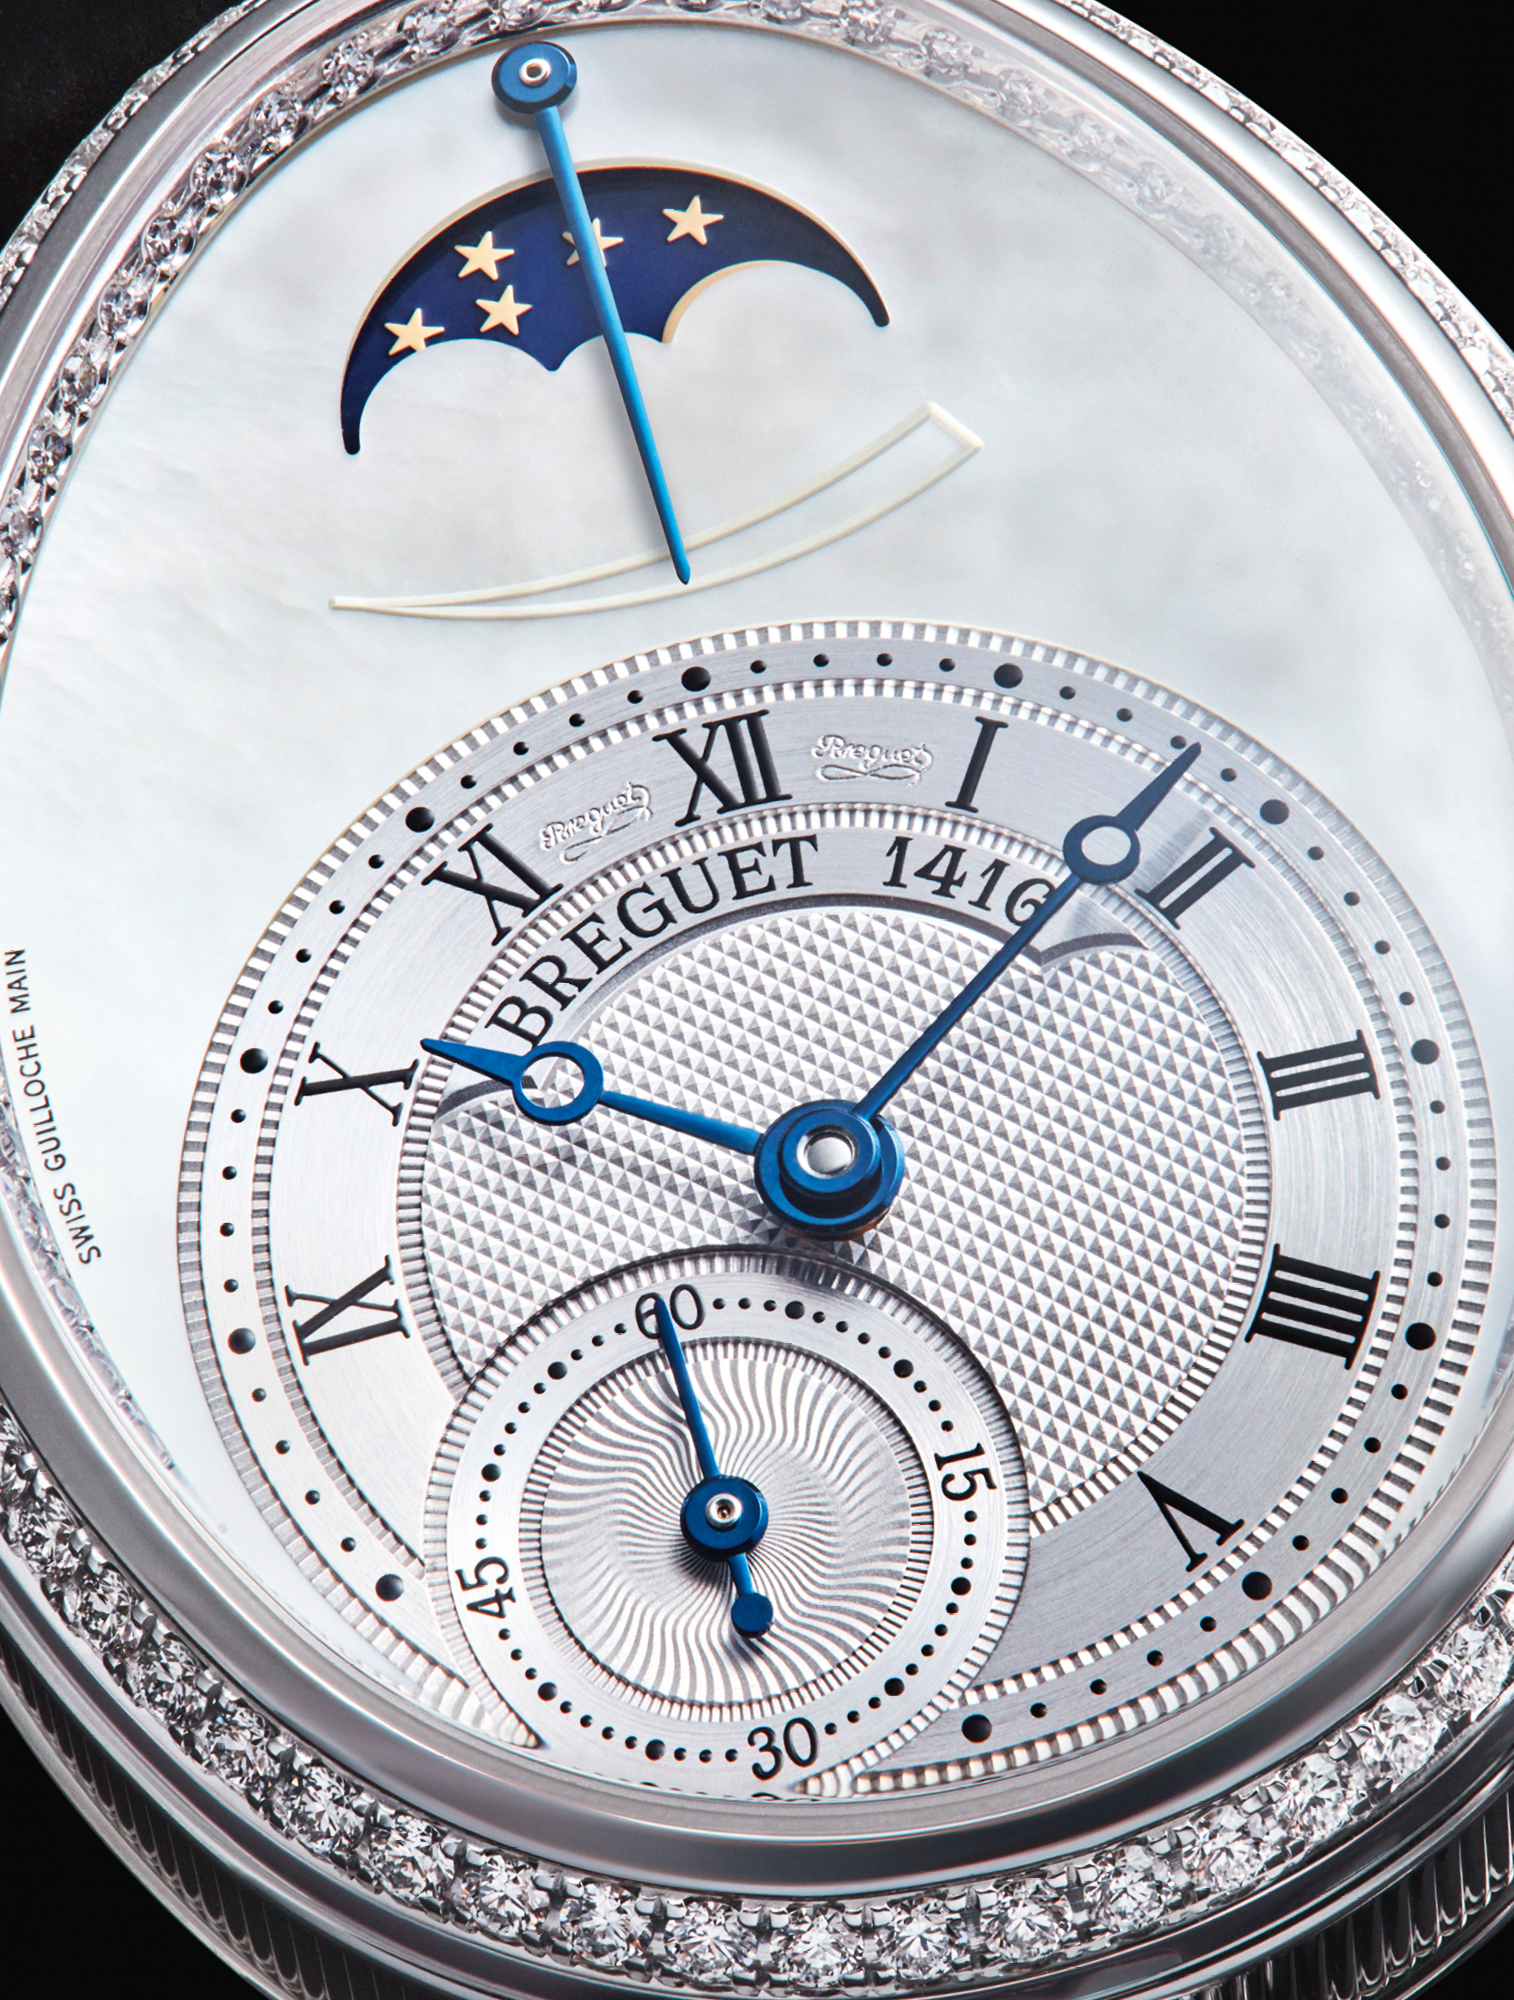 Distinguished by an 18ct white gold case set with 128 diamonds, Breguet’s Reine de Naples 8908 wristwatch references the original model and displays a number of beautiful guilloché techniques. £29,900, BREGUET